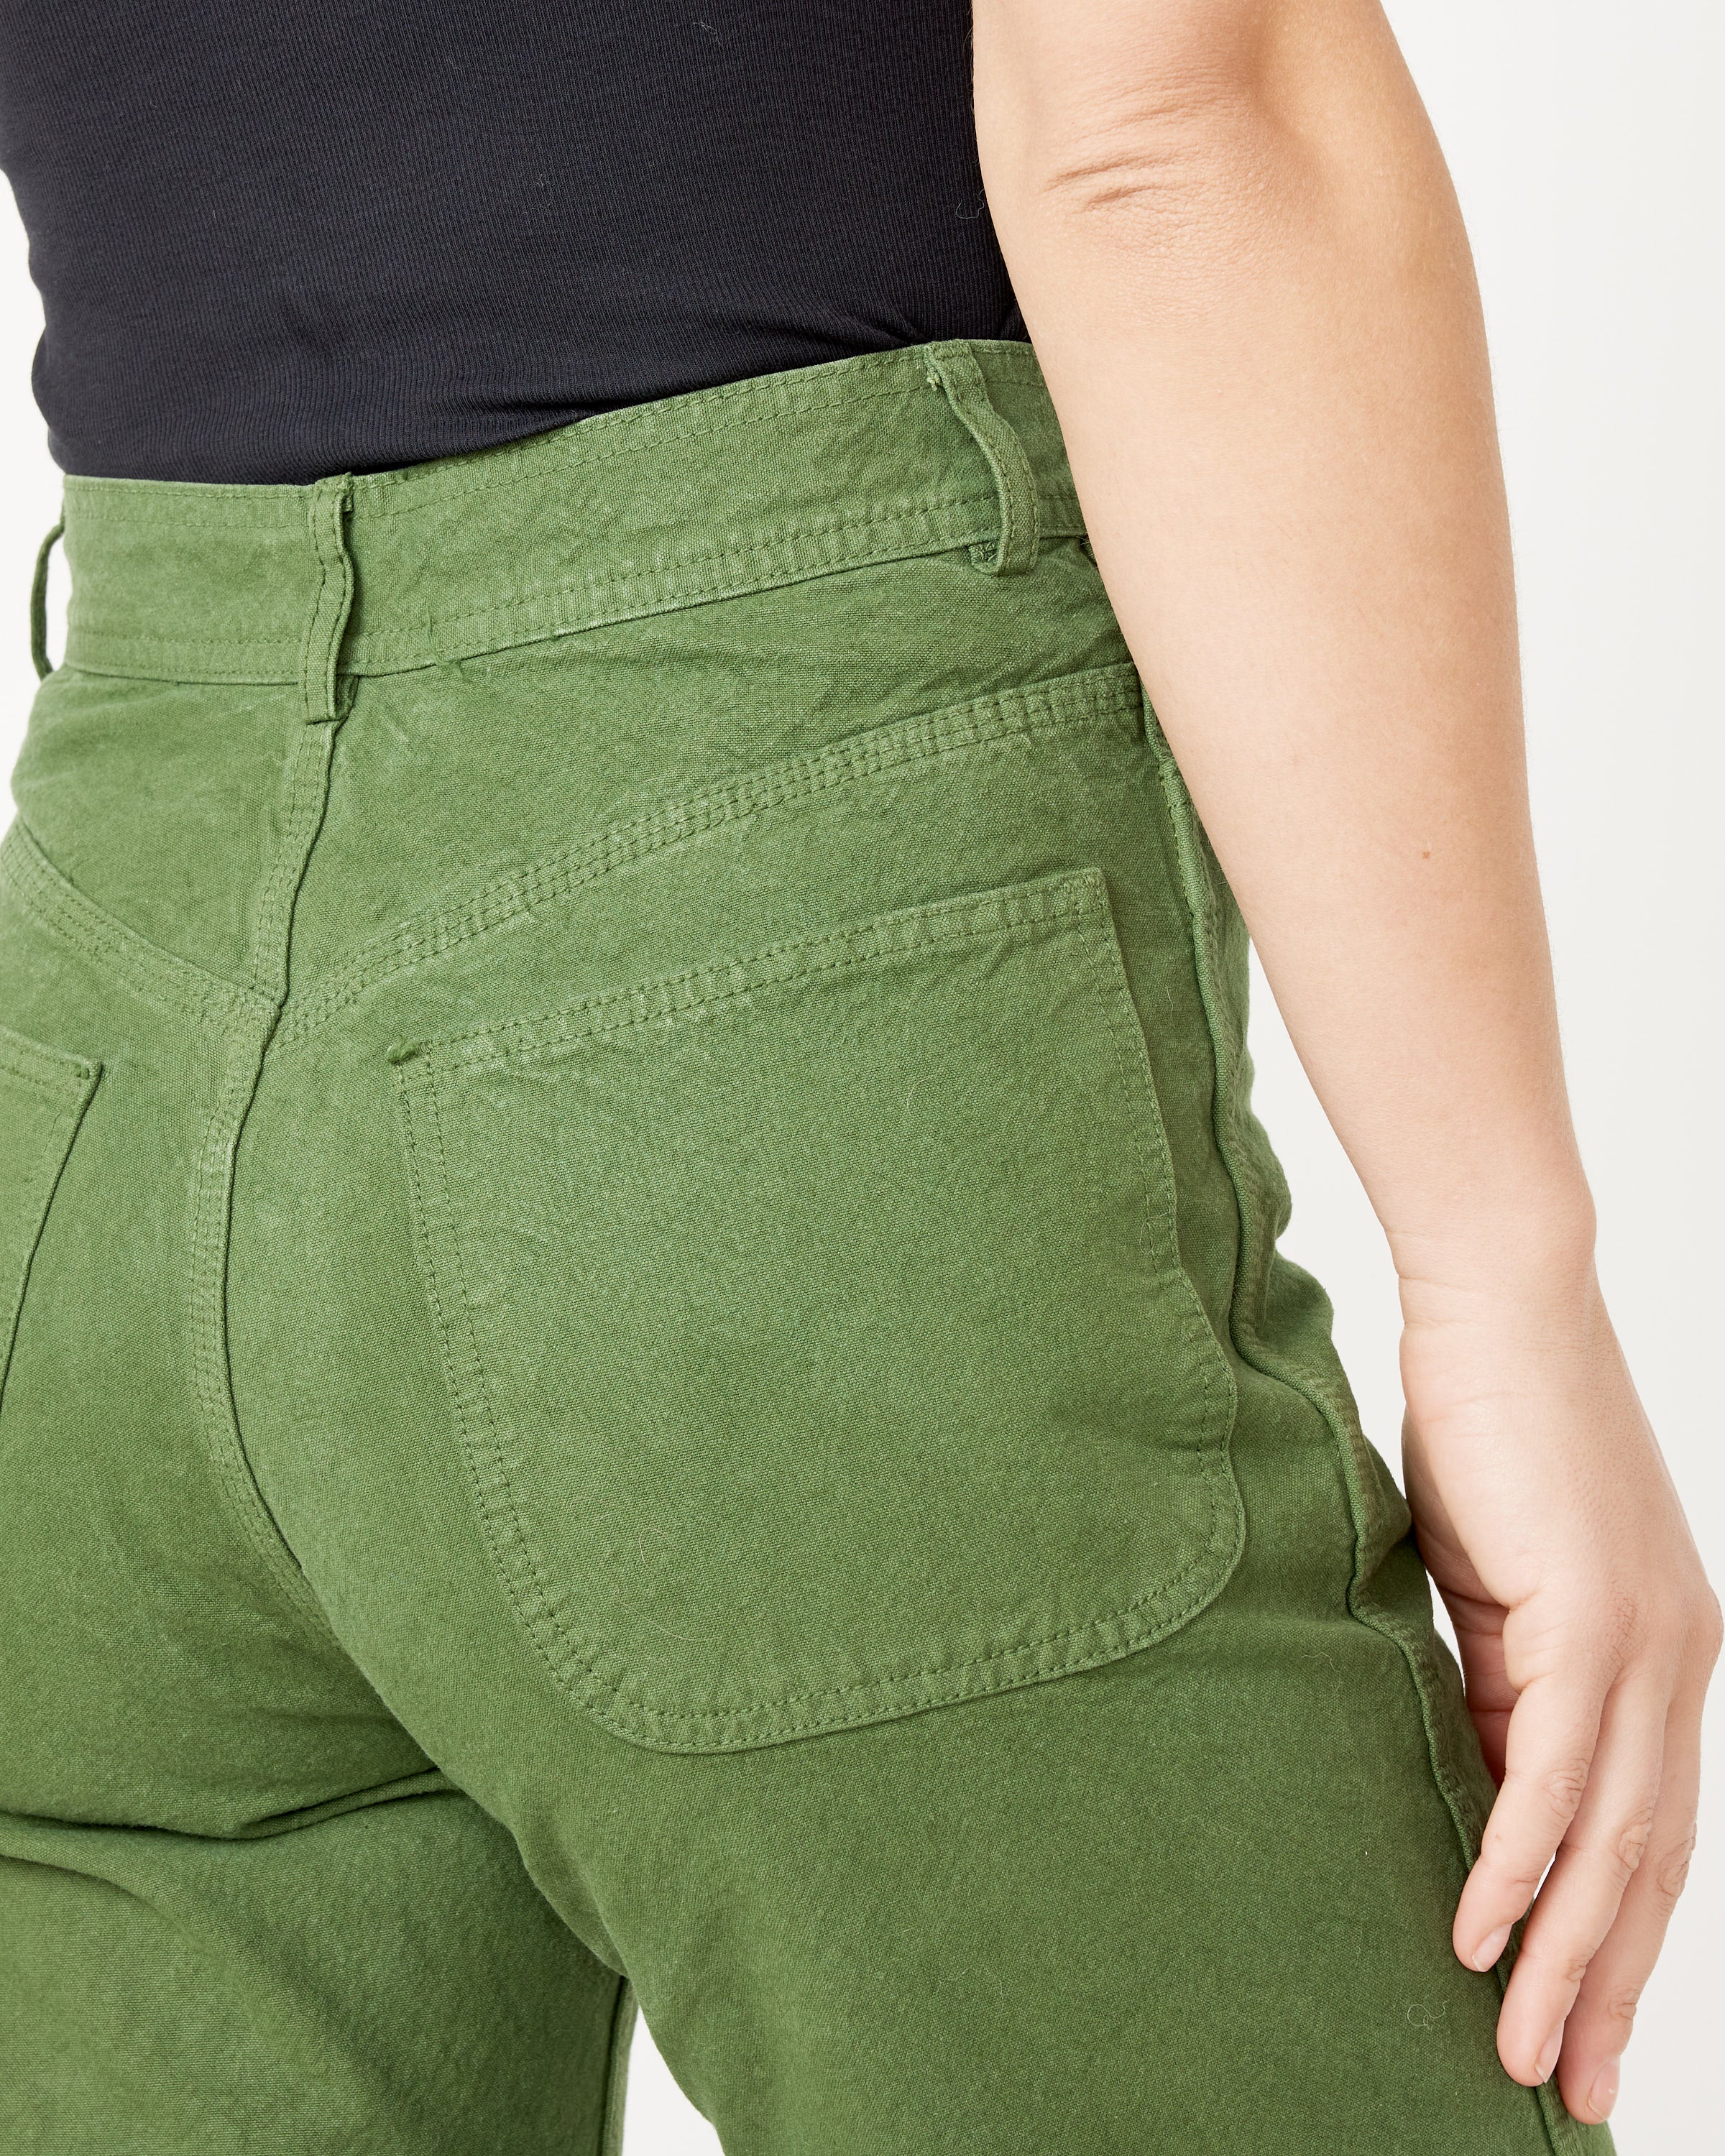 Handy Pant in Olive